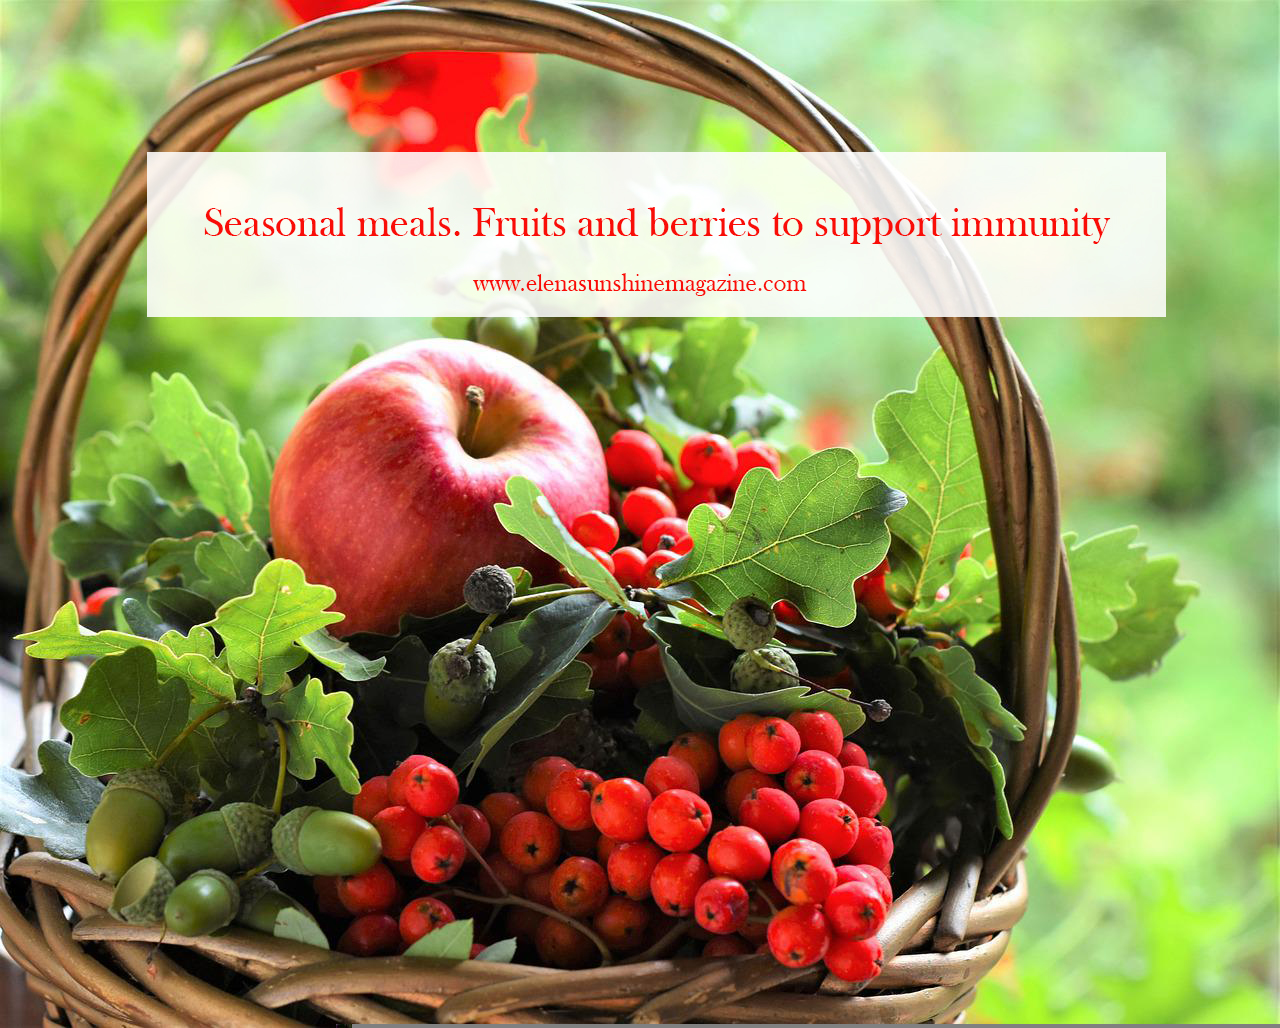 Seasonal meals. Fruits and berries to support immunity